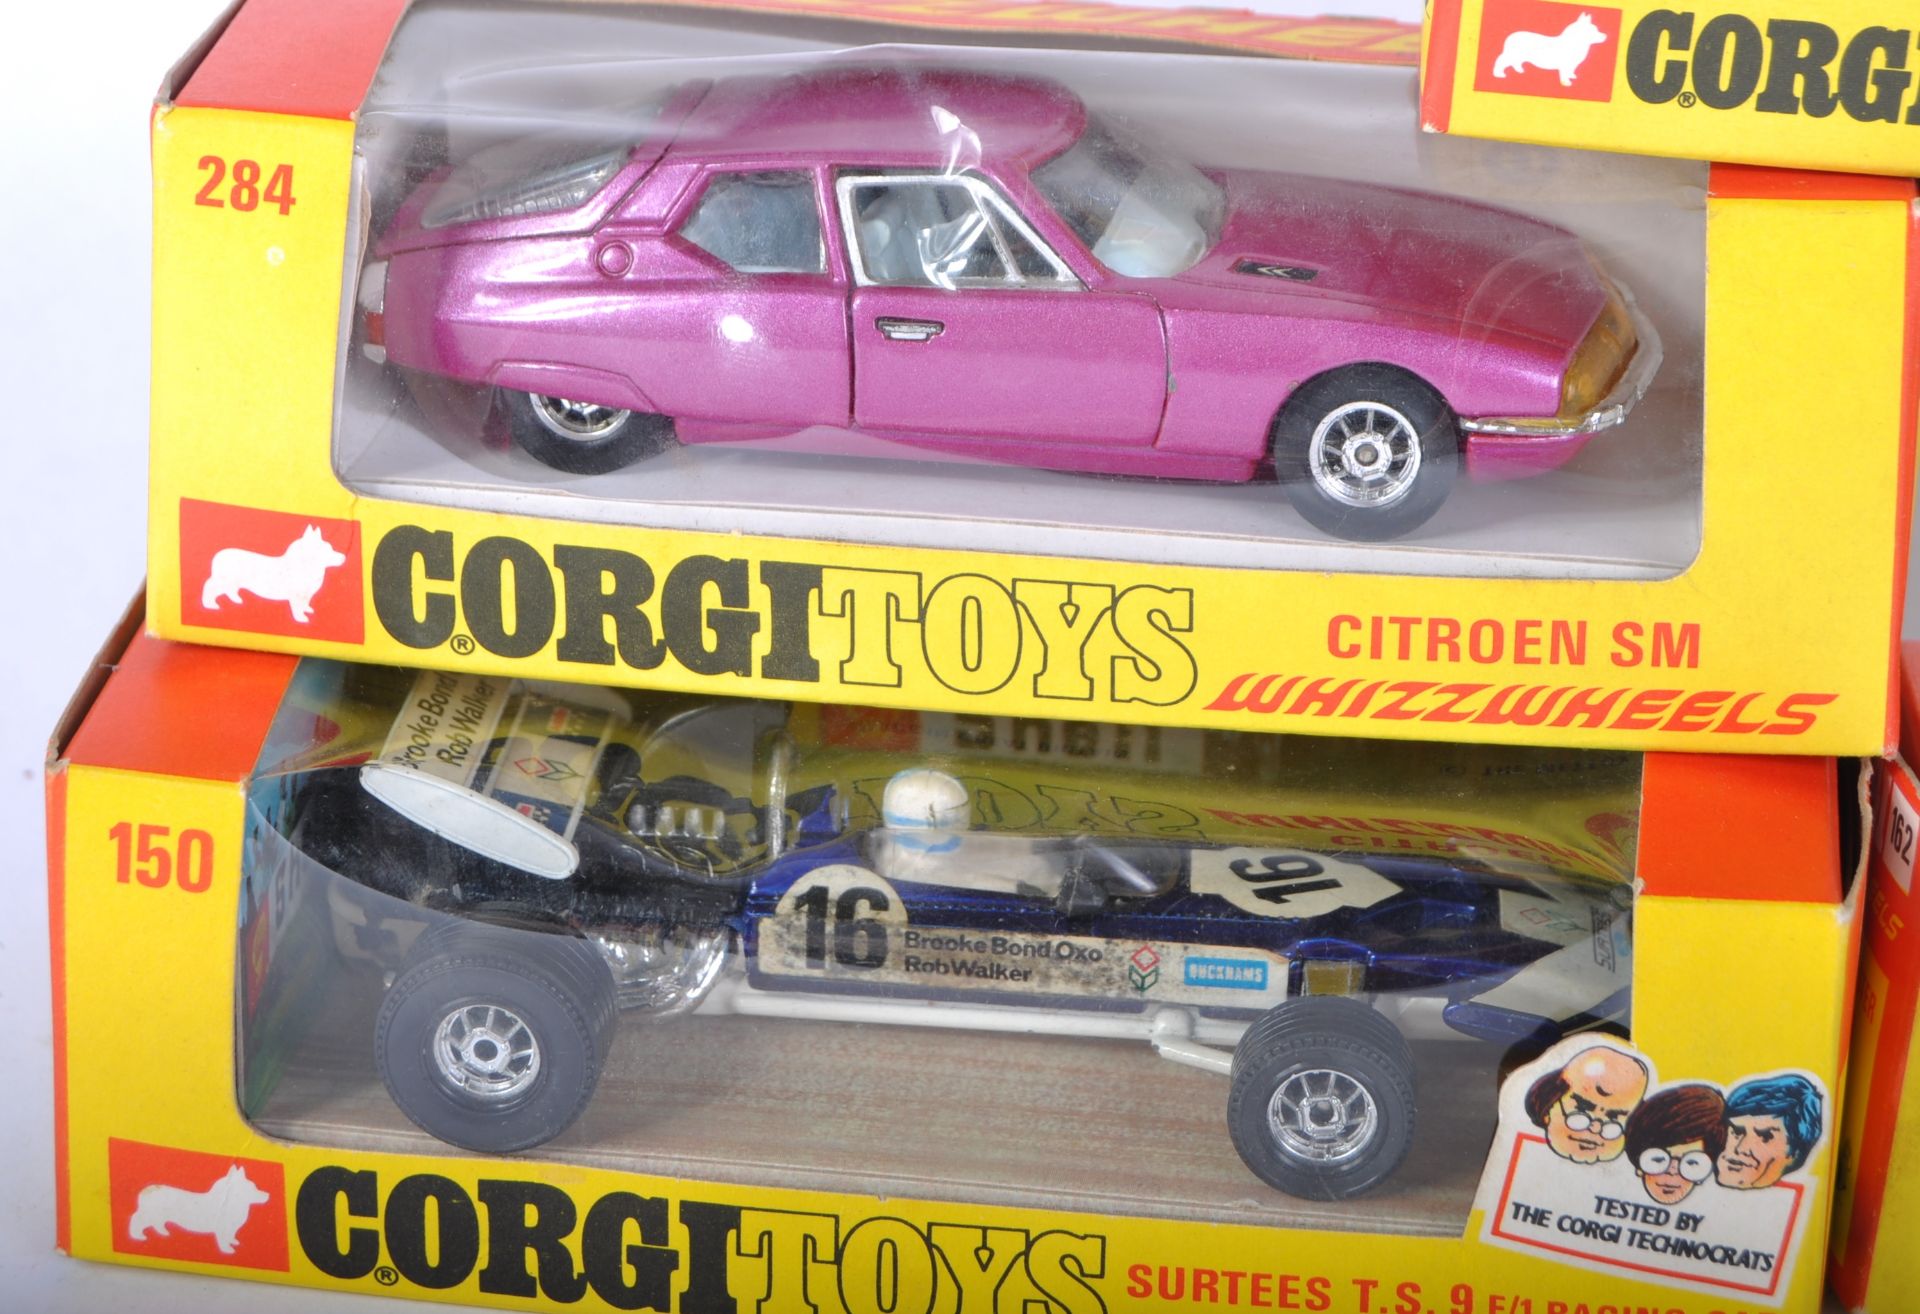 COLLECTION OF VINTAGE CORGI TOYS WHIZZWHEELS DIECAST MODELS - Image 3 of 4